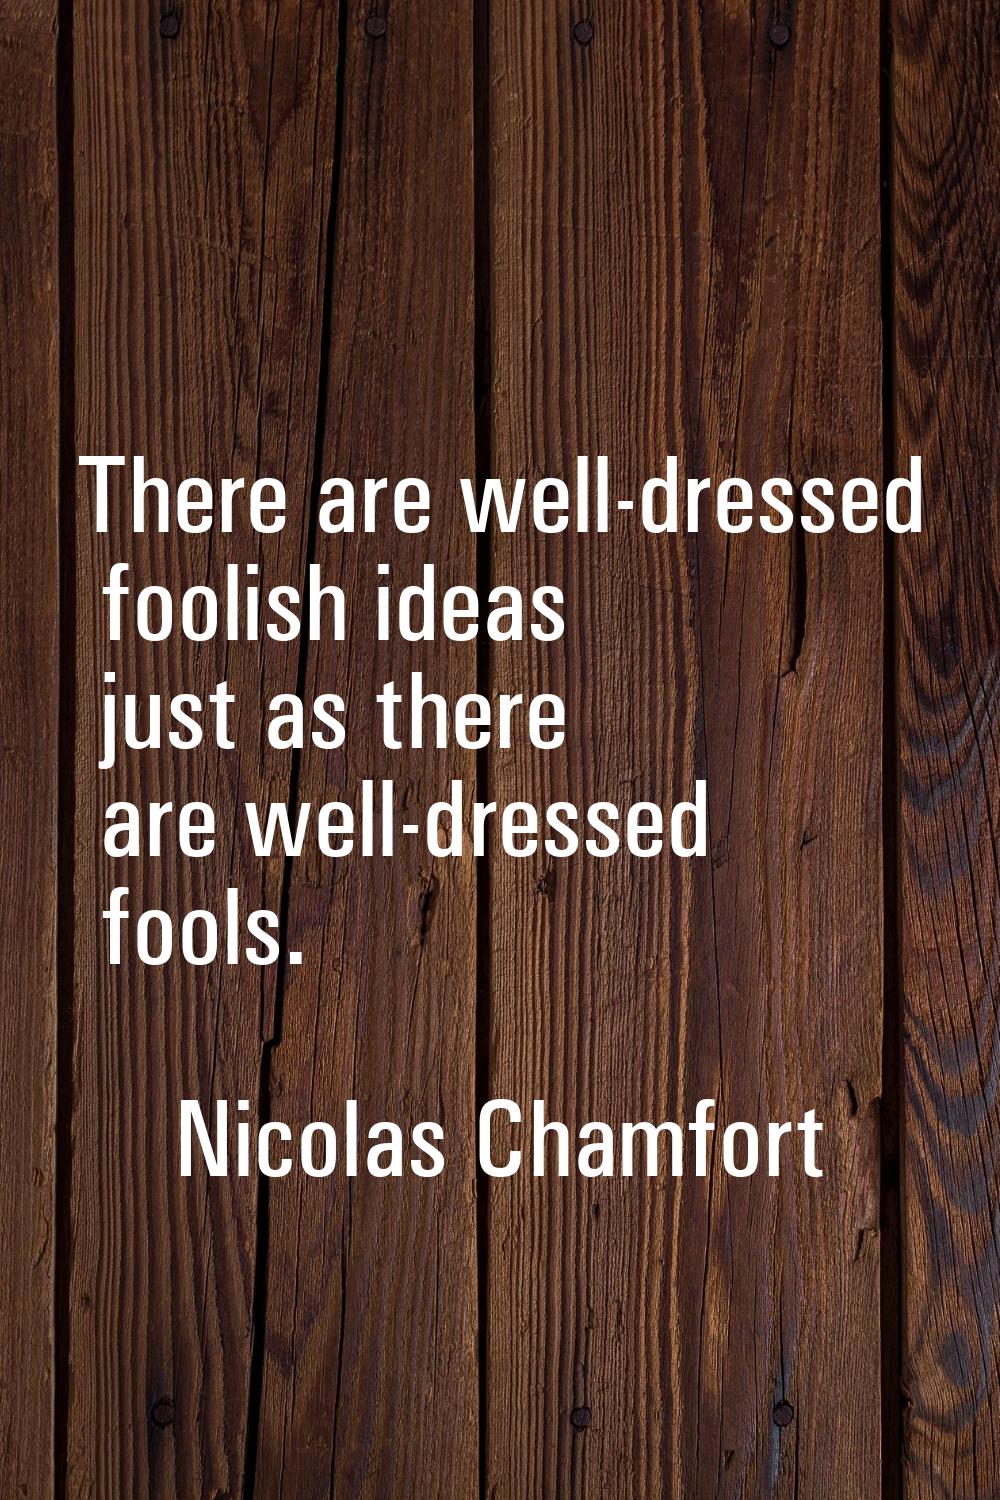 There are well-dressed foolish ideas just as there are well-dressed fools.